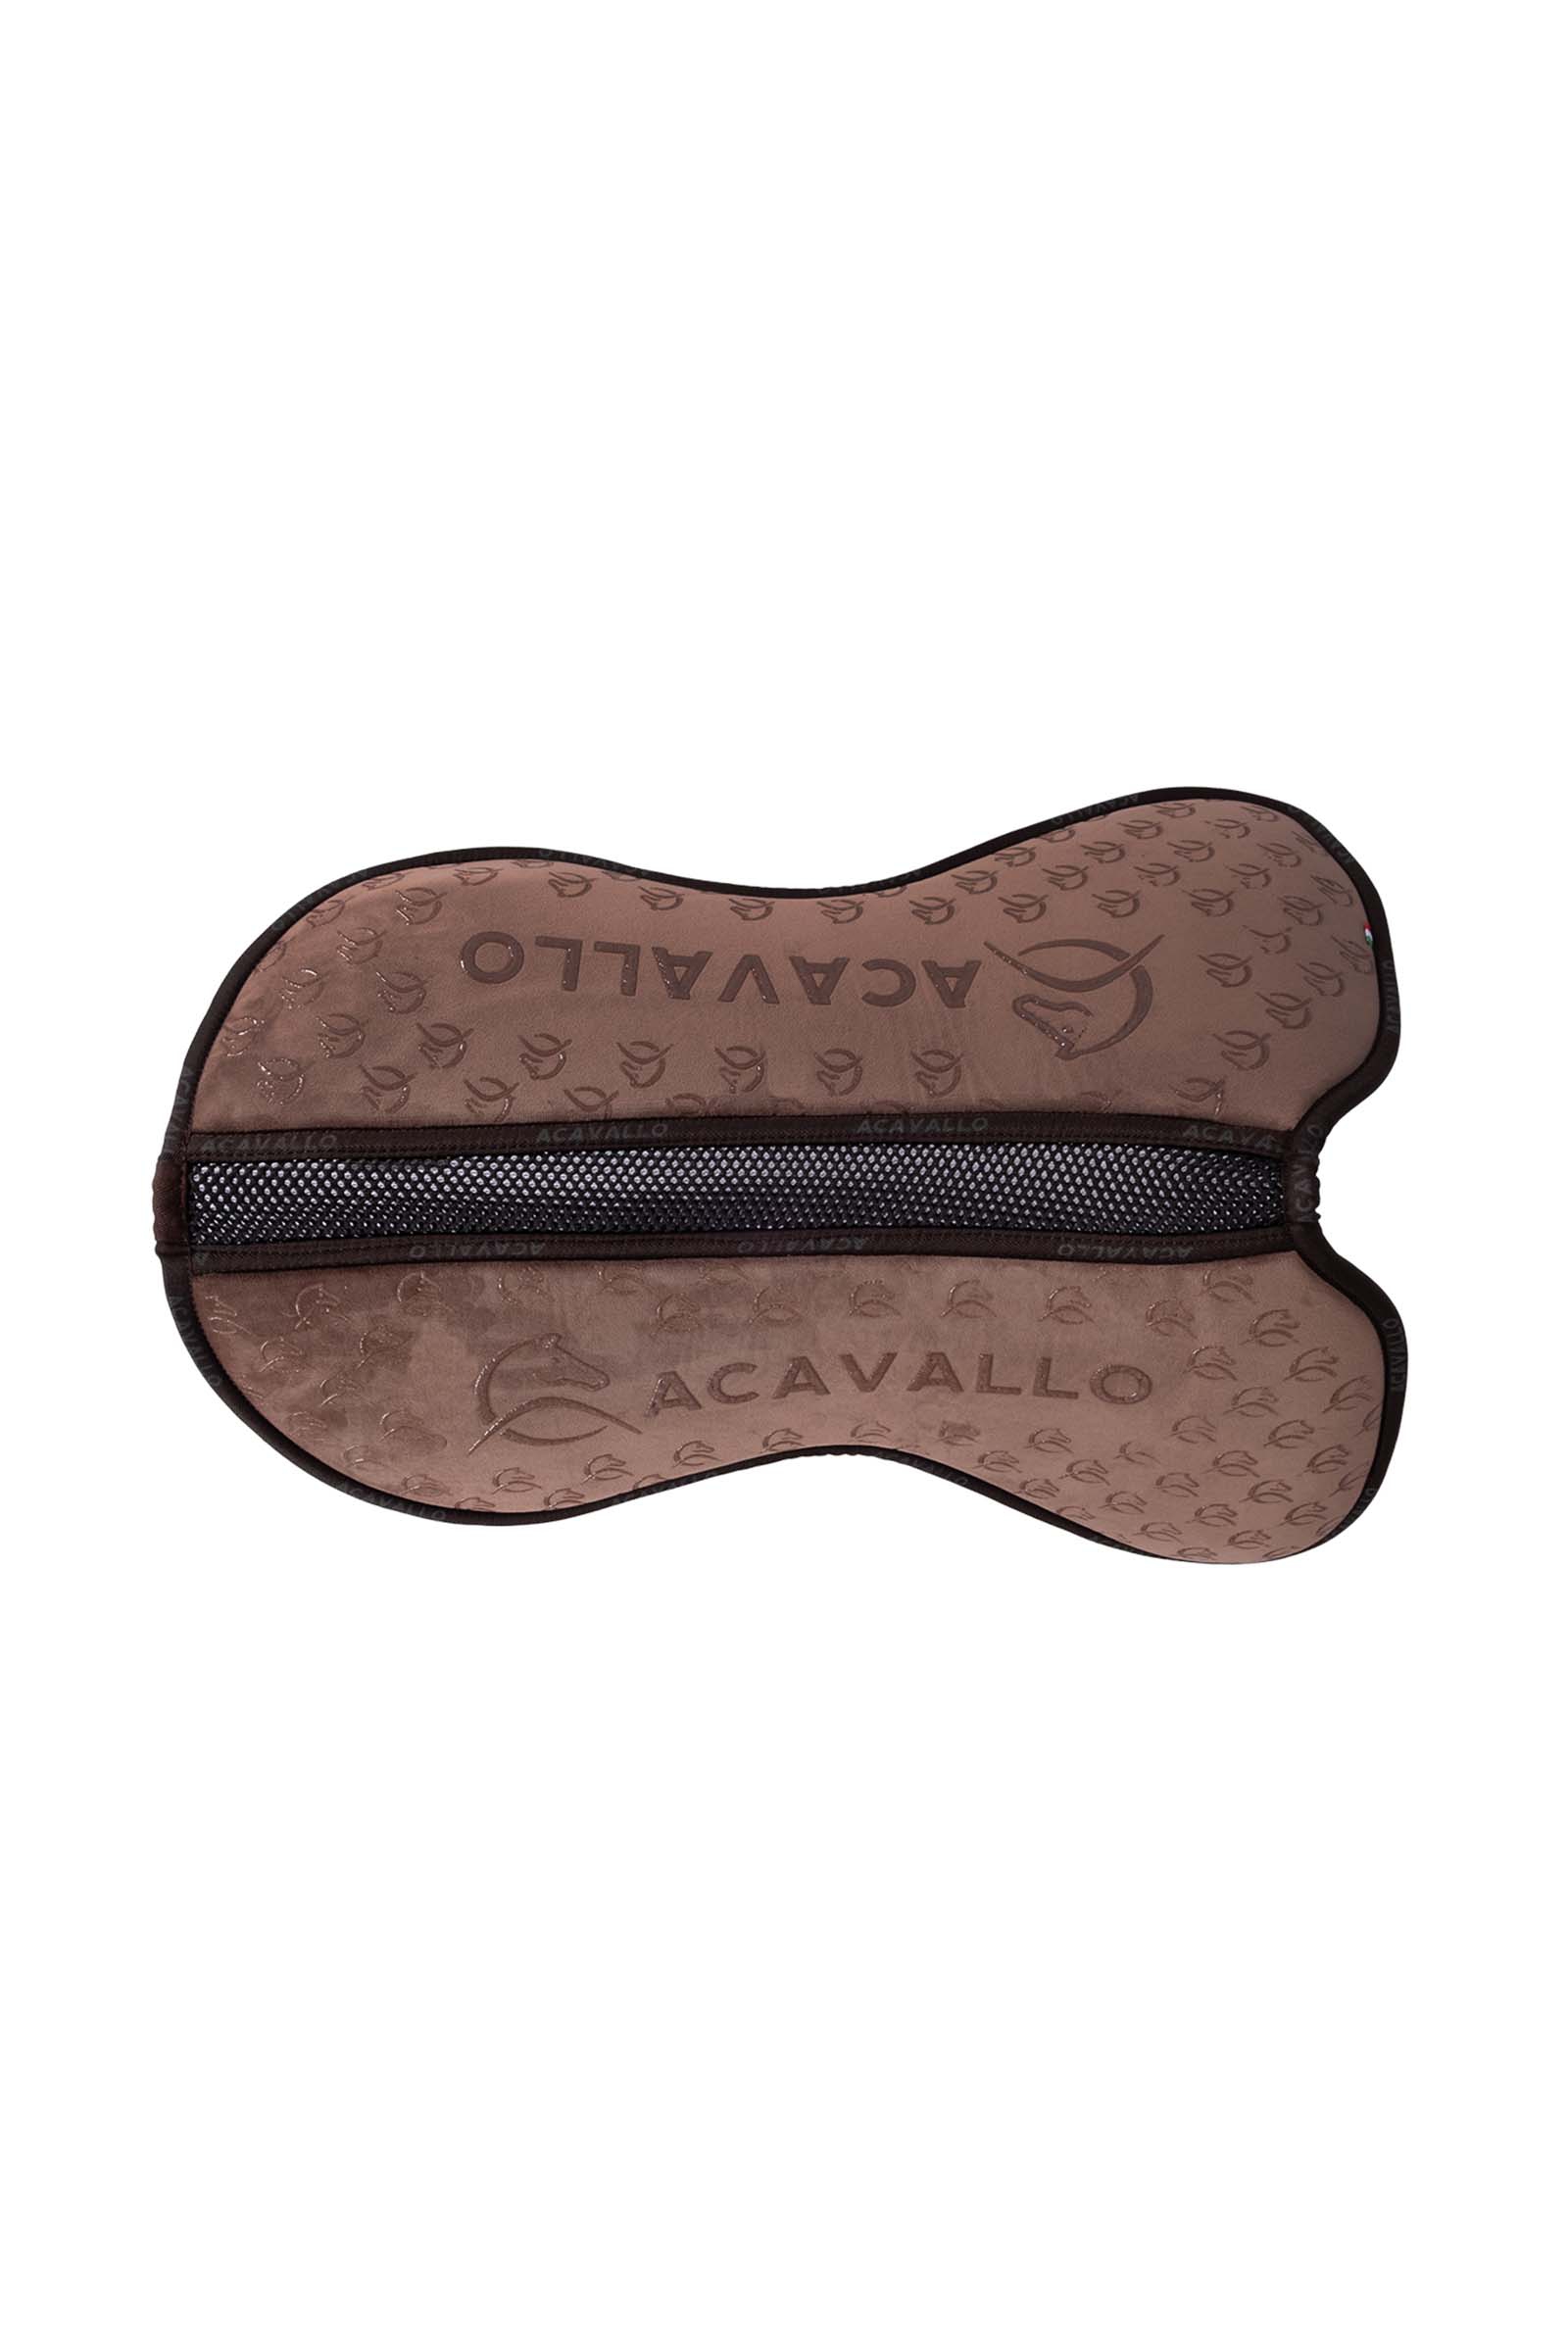 Acavallo Saddle Pad Spine Close Contact in Memory Foam Double Felt, Jumping Pad